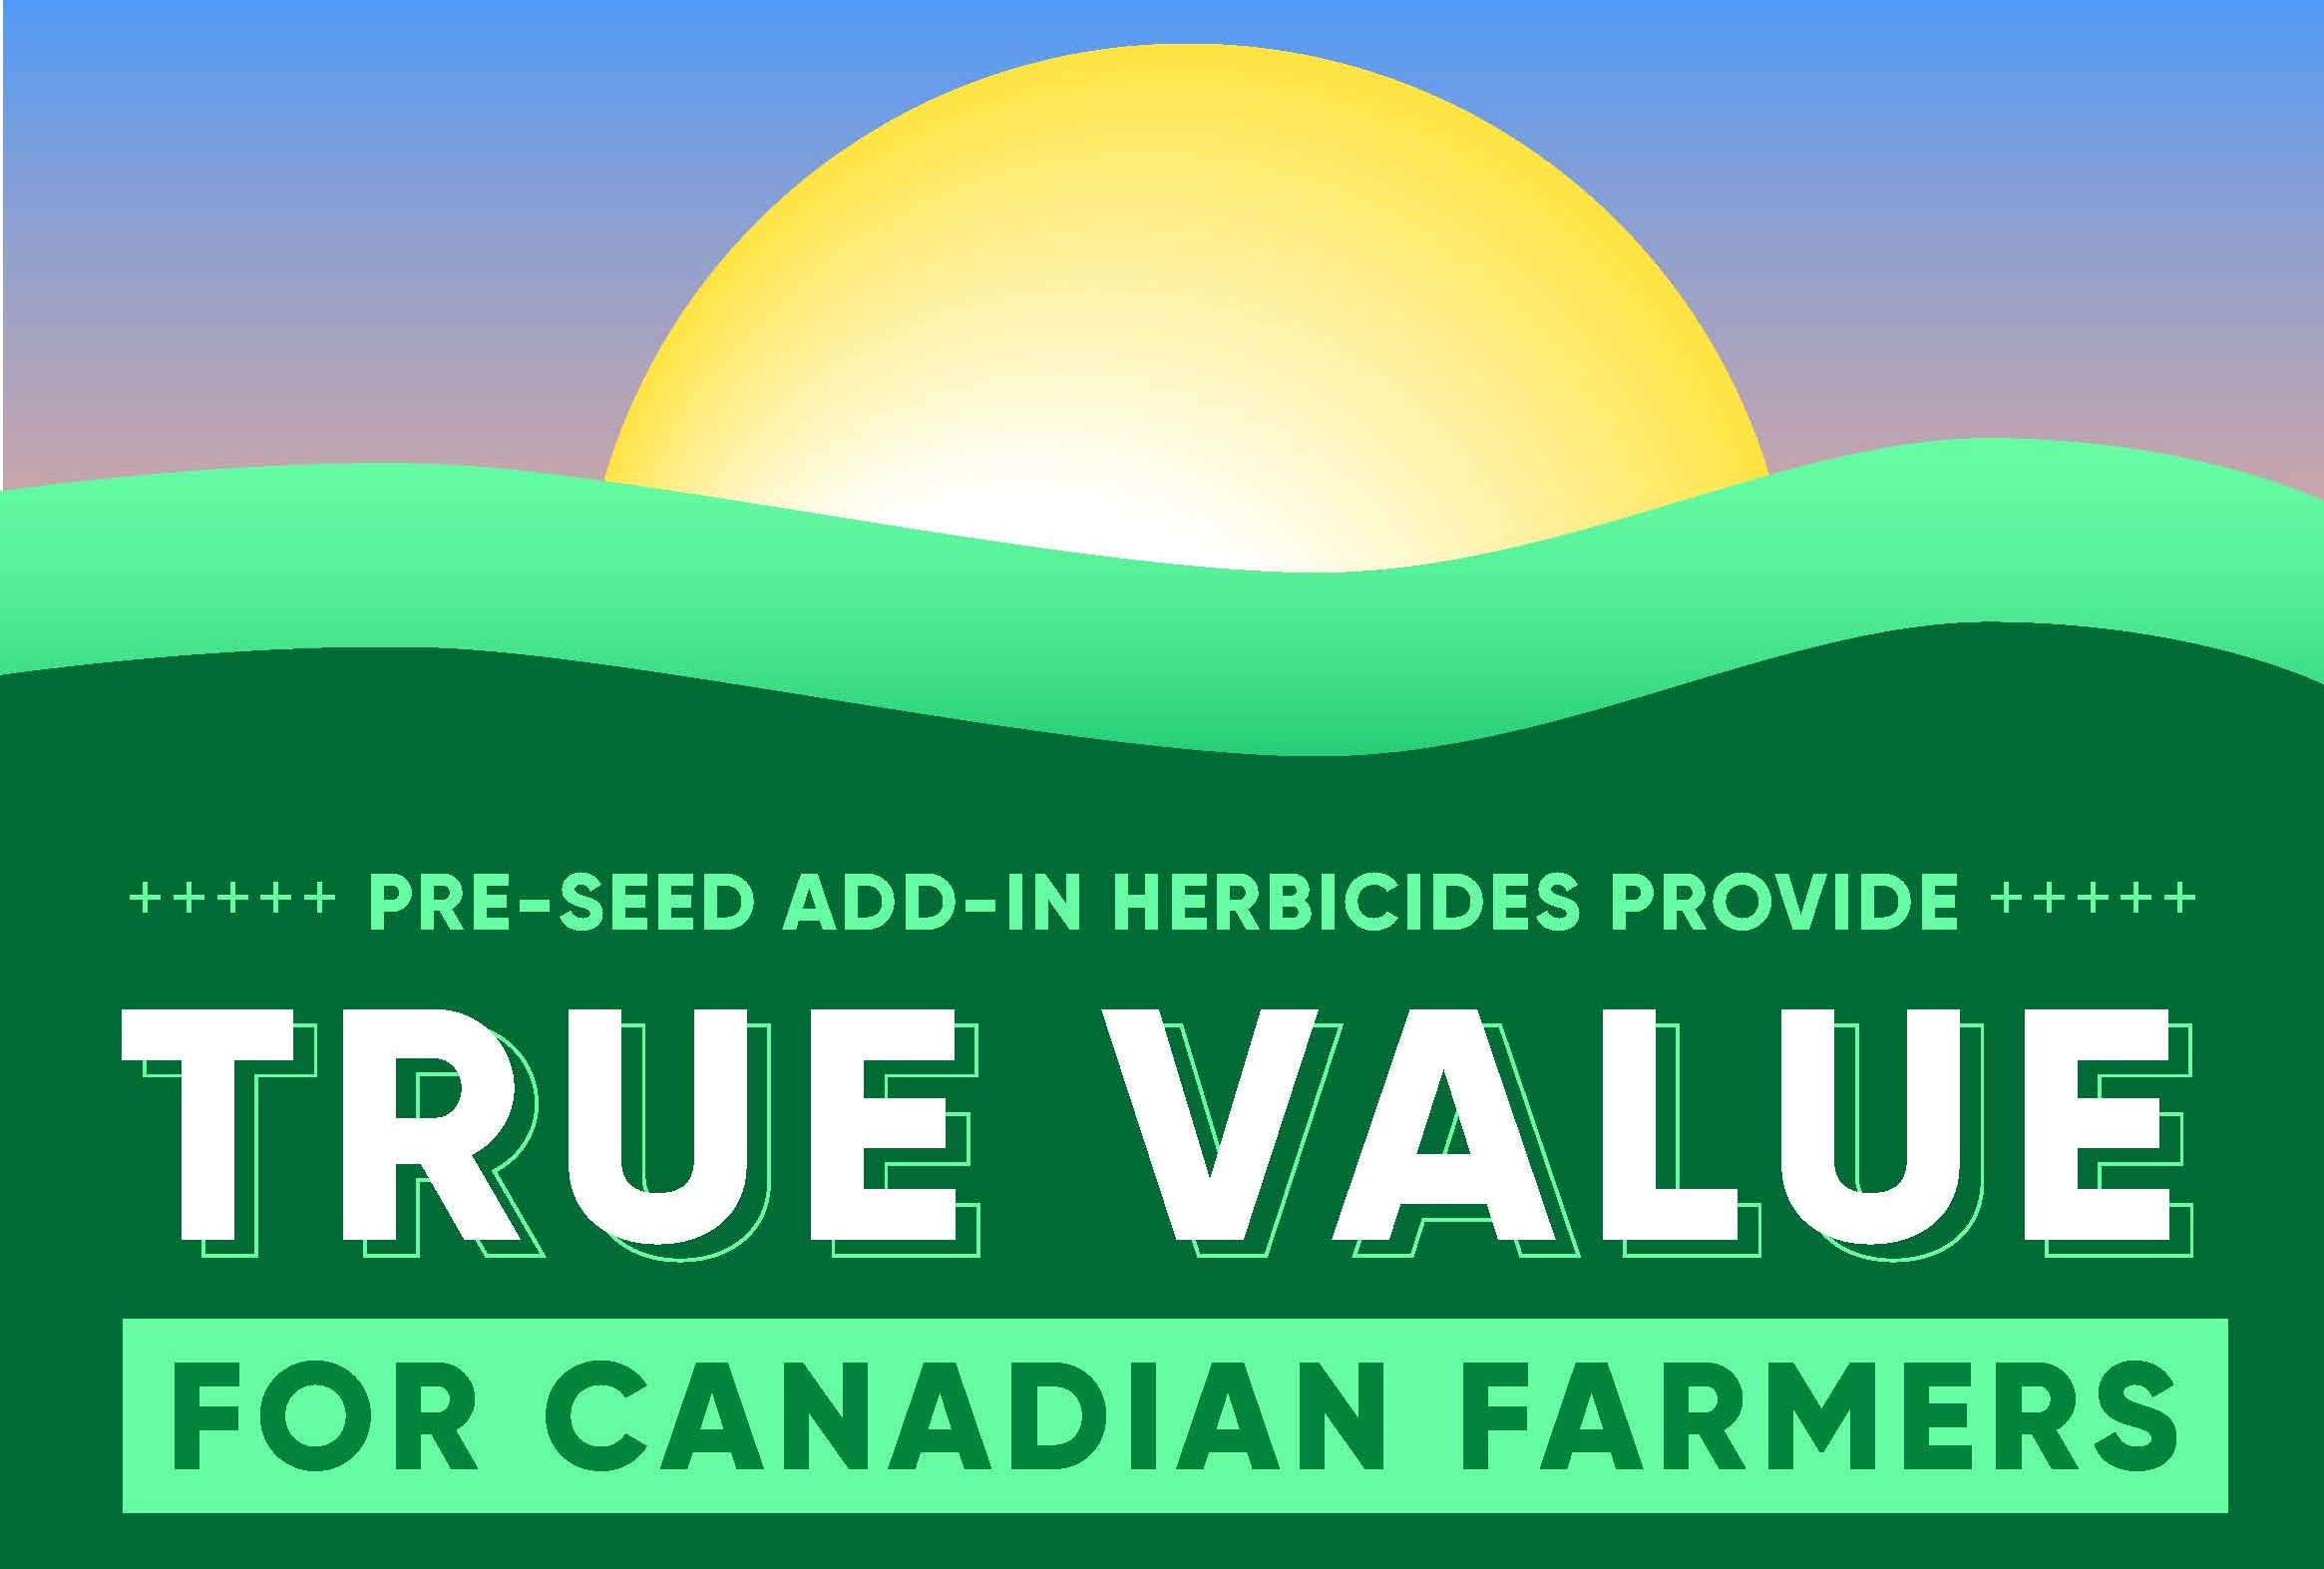 Preseed herbicides provide true value for canadian farmers